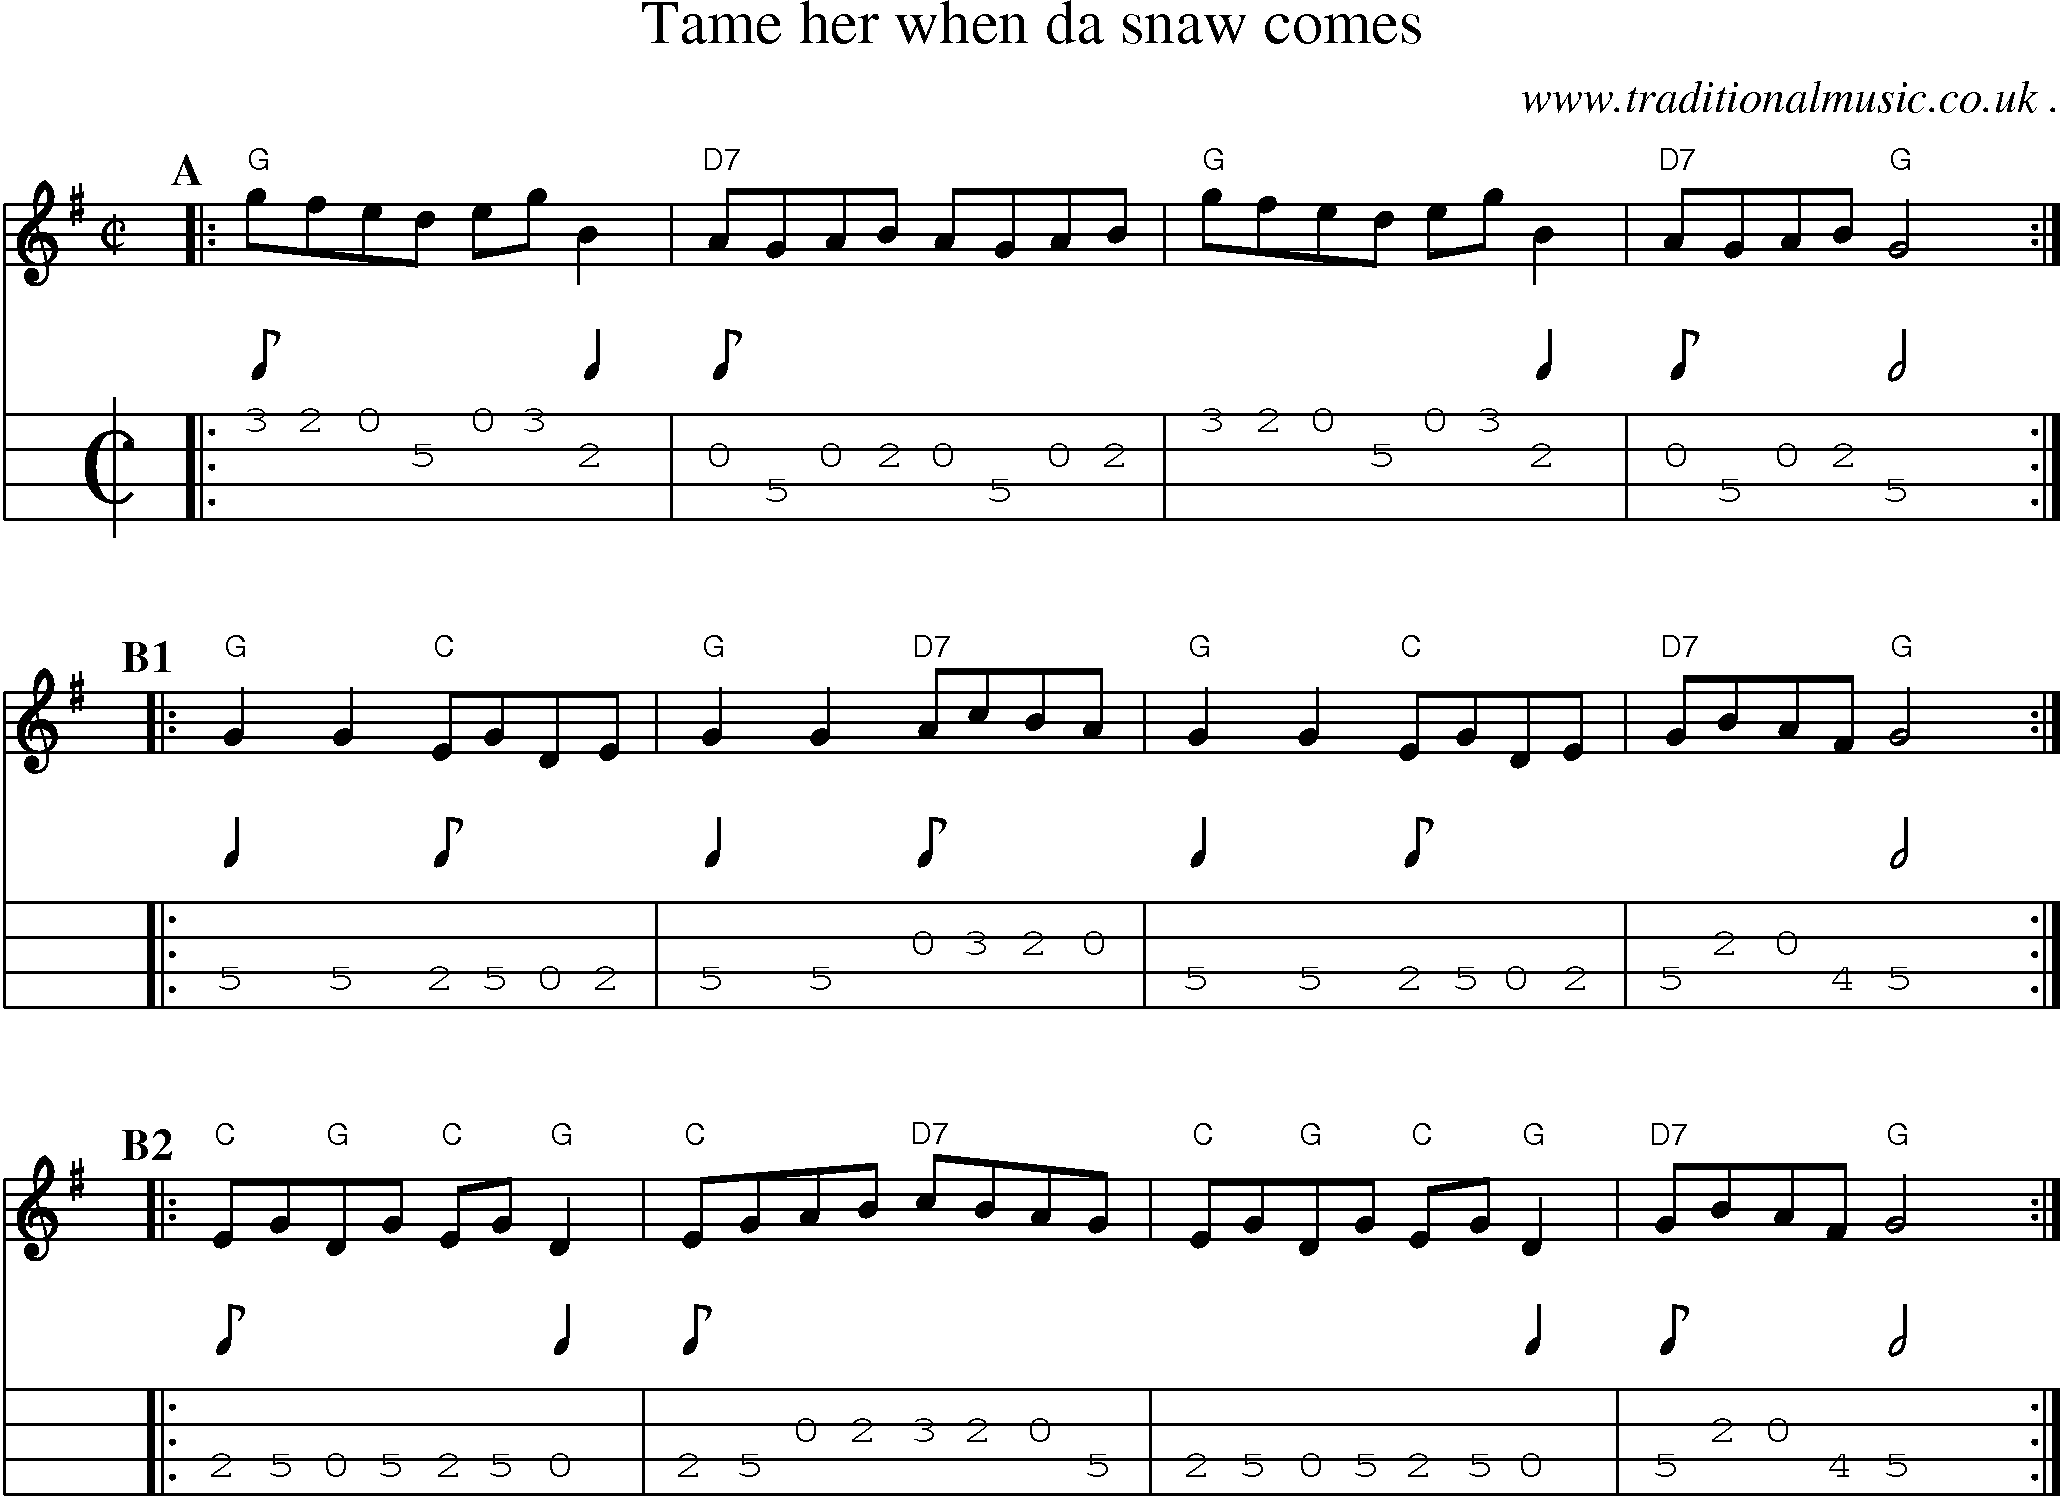 Sheet-music  score, Chords and Mandolin Tabs for Tame Her When Da Snaw Comes